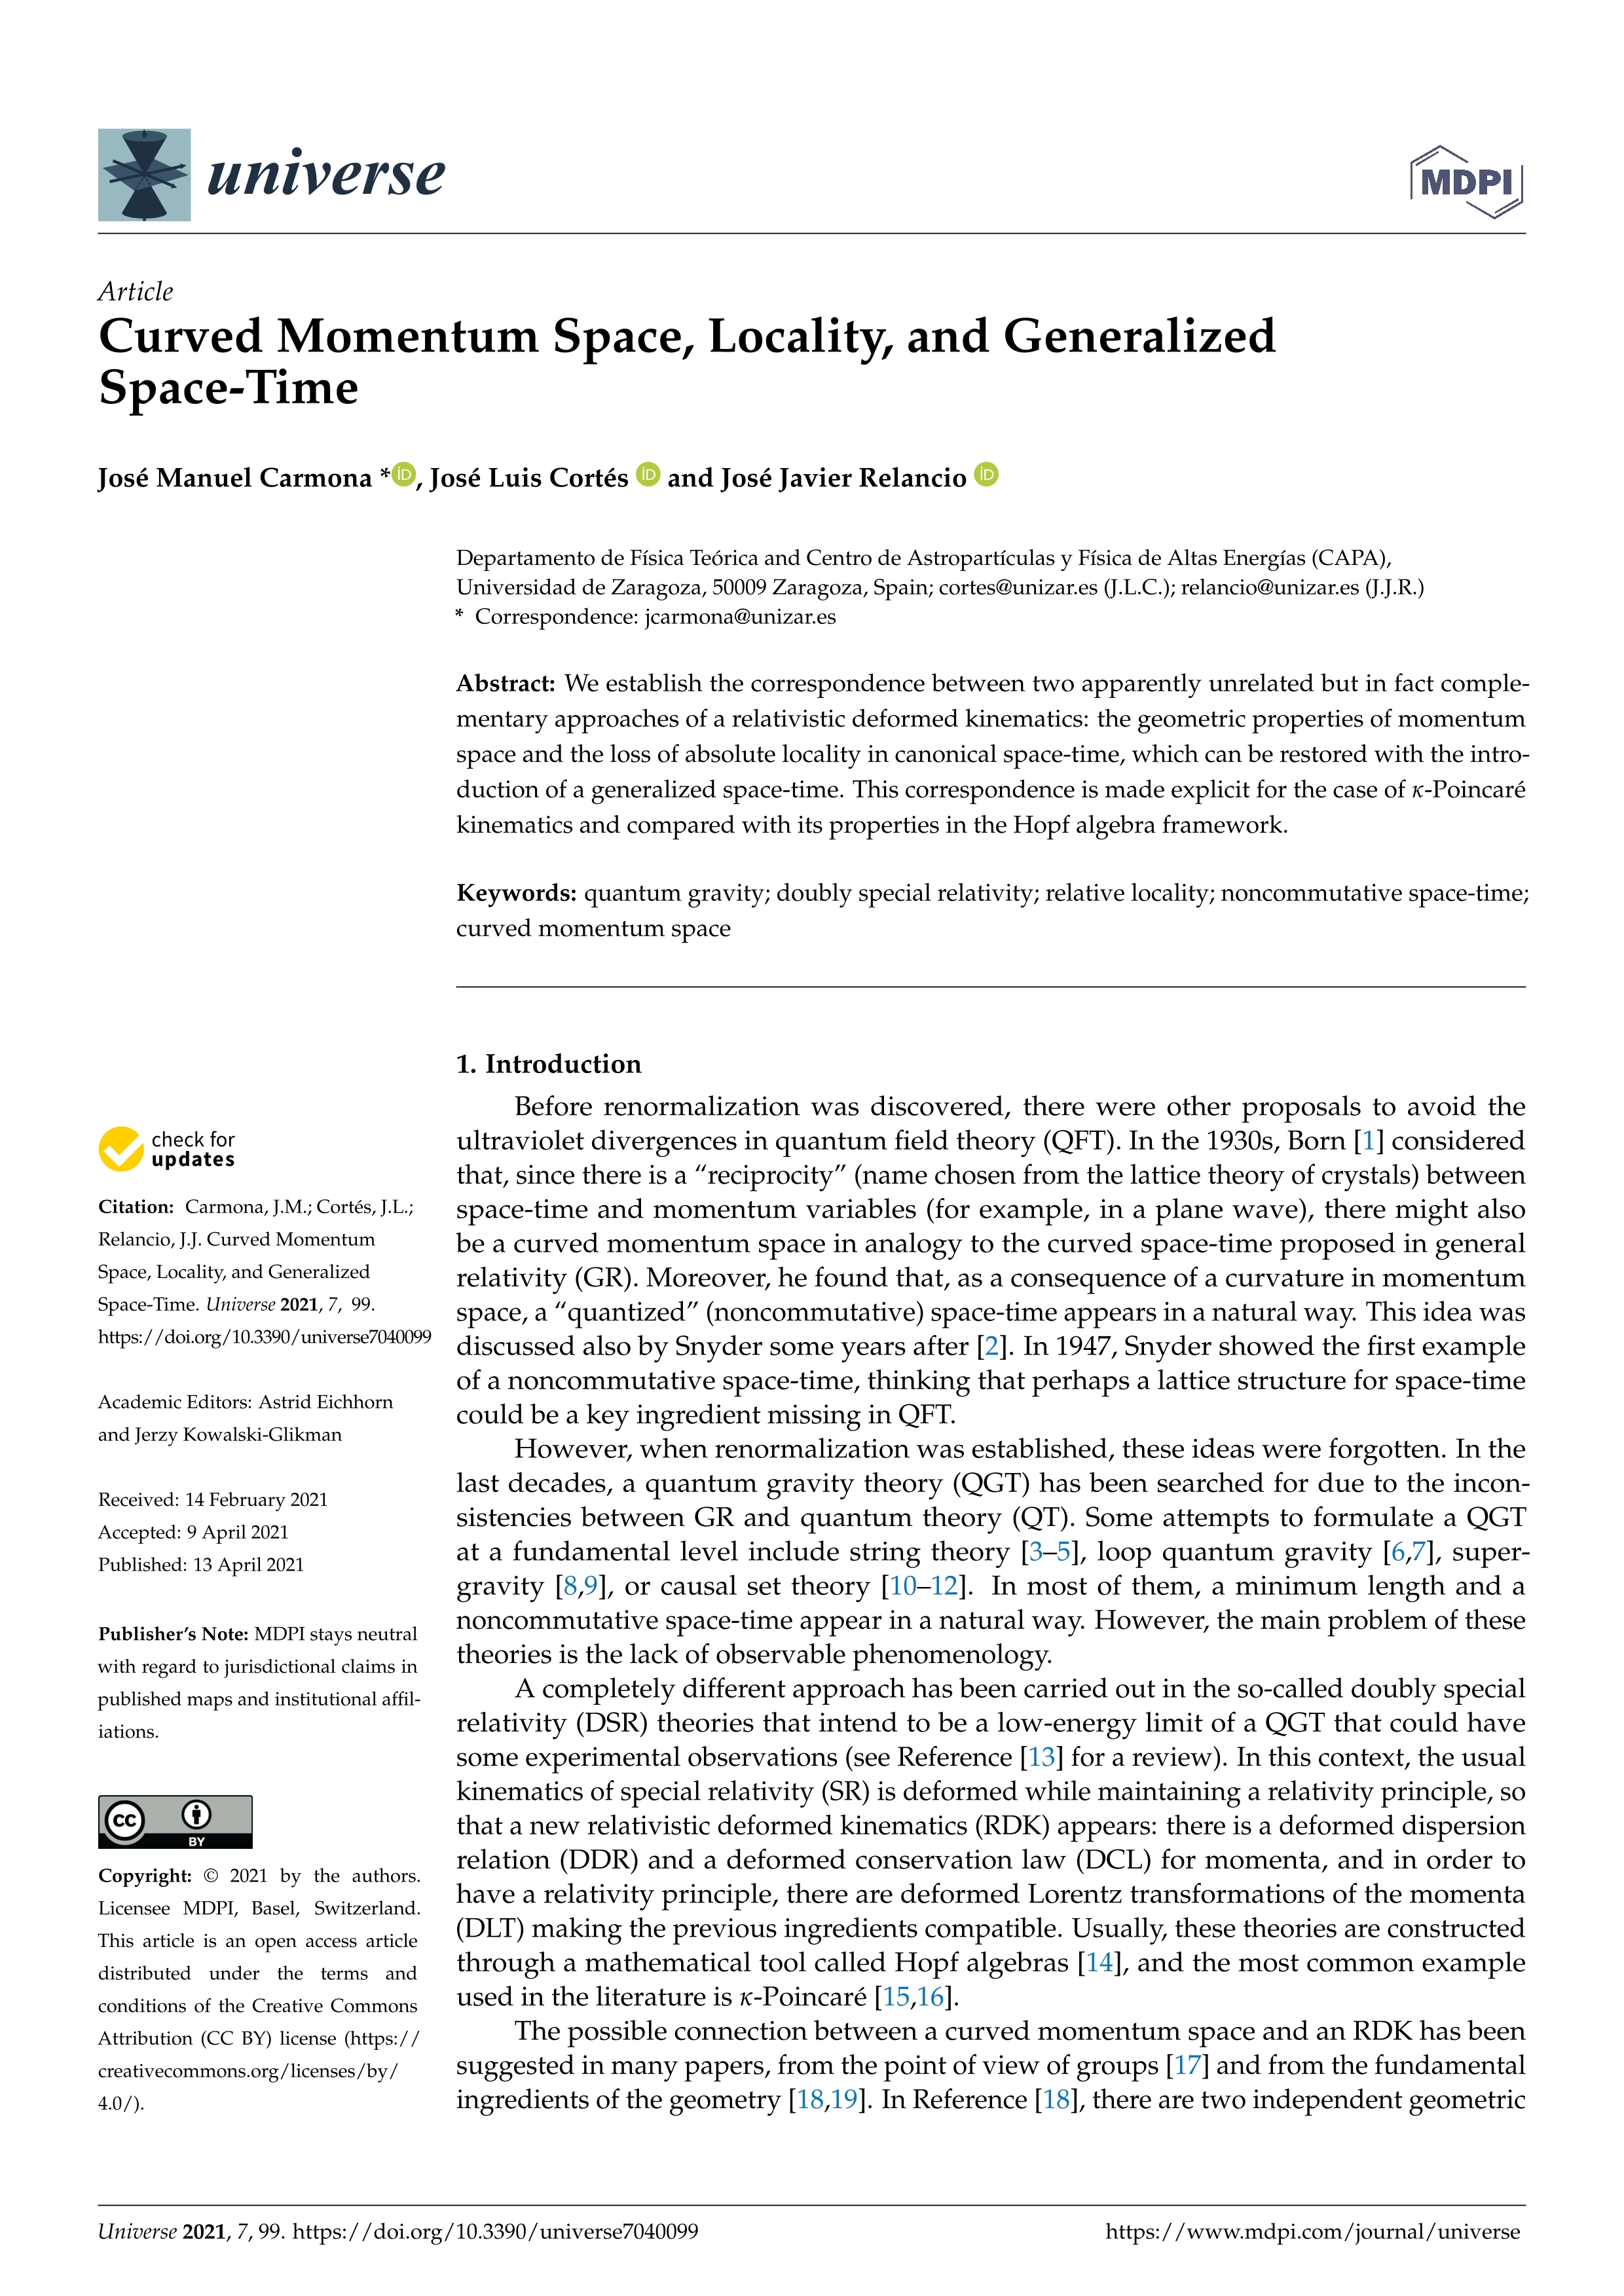 Curved momentum space, locality, and generalized space-time